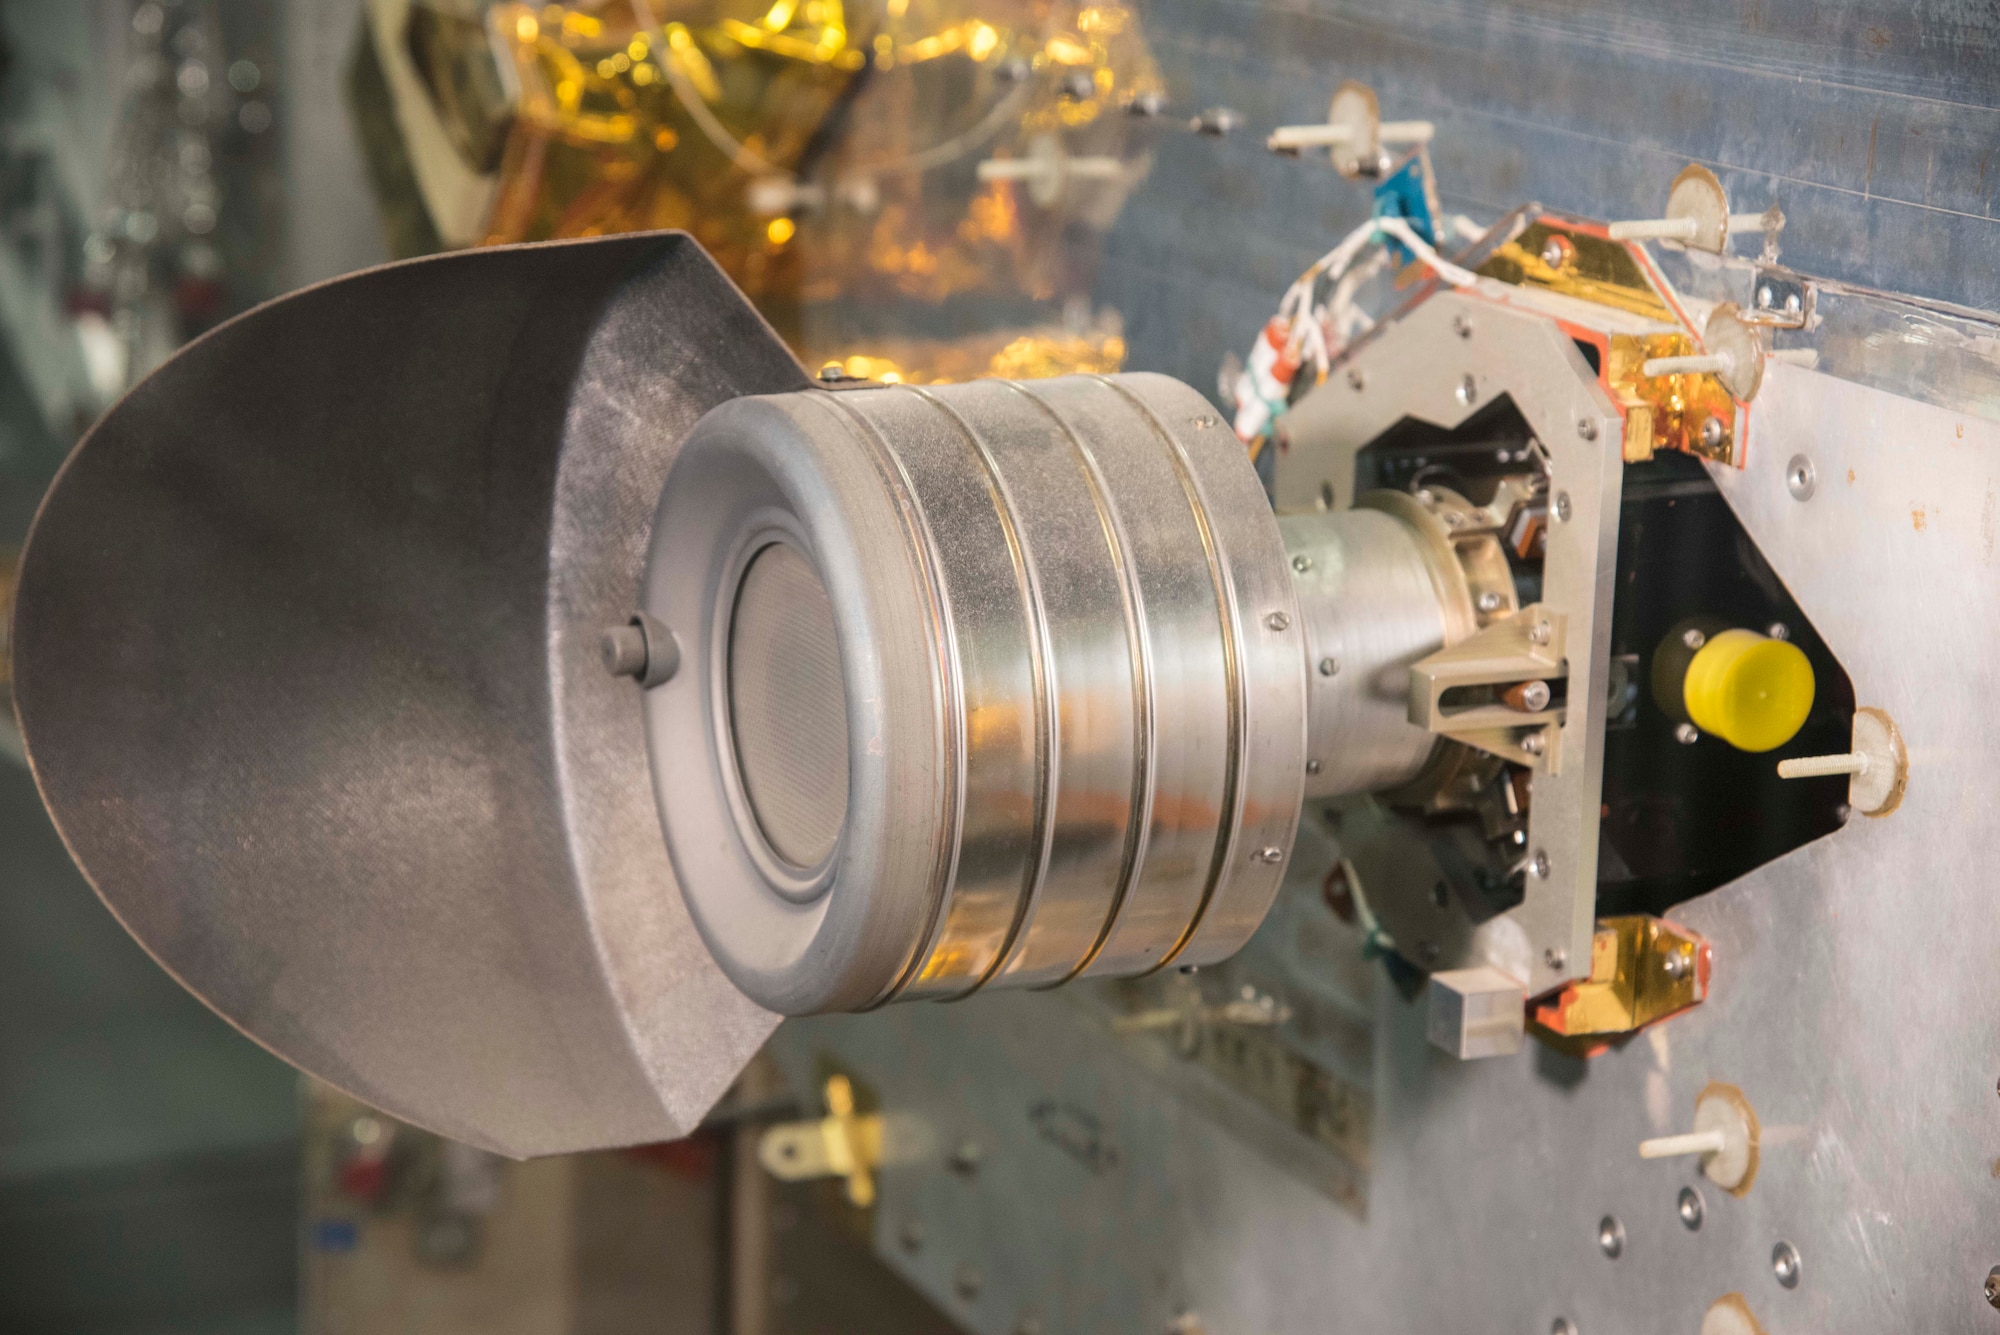 NASA Lewis (now Glenn) Researcher Center in Cleveland, OH, developed this ion thruster to help USAF spacecraft like P80-1 stay precisely positioned in space. The powerful lightweight thruster is electrical instead of a chemical rocket, and is powered by mercury. (U.S. Air Force photo by Ken LaRock)